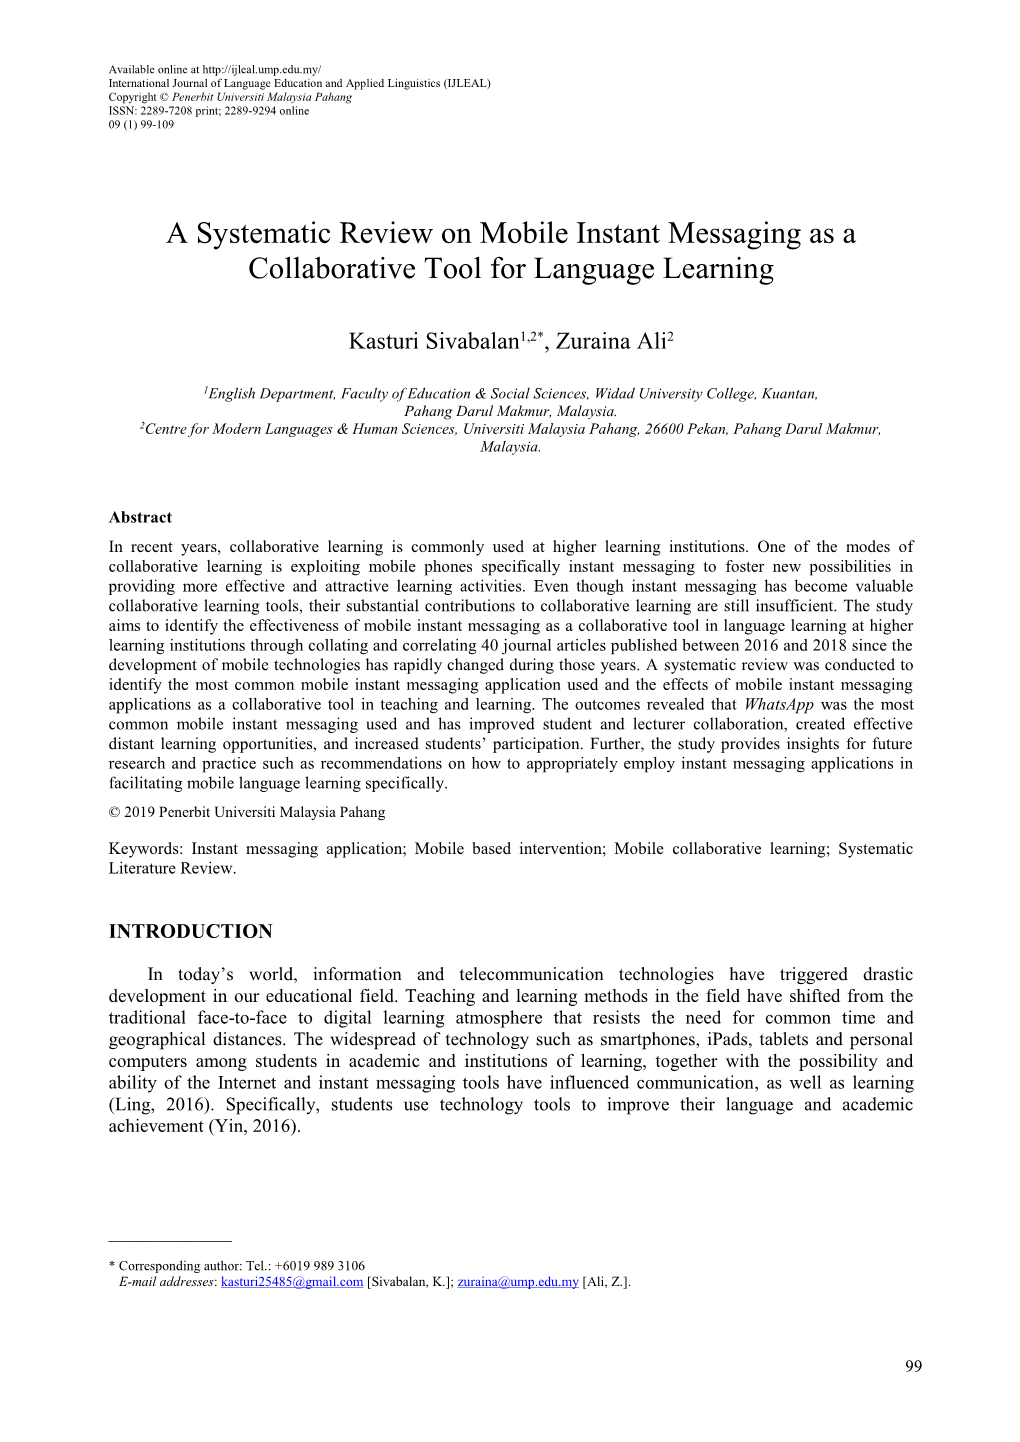 A Systematic Review on Mobile Instant Messaging As a Collaborative Tool for Language Learning